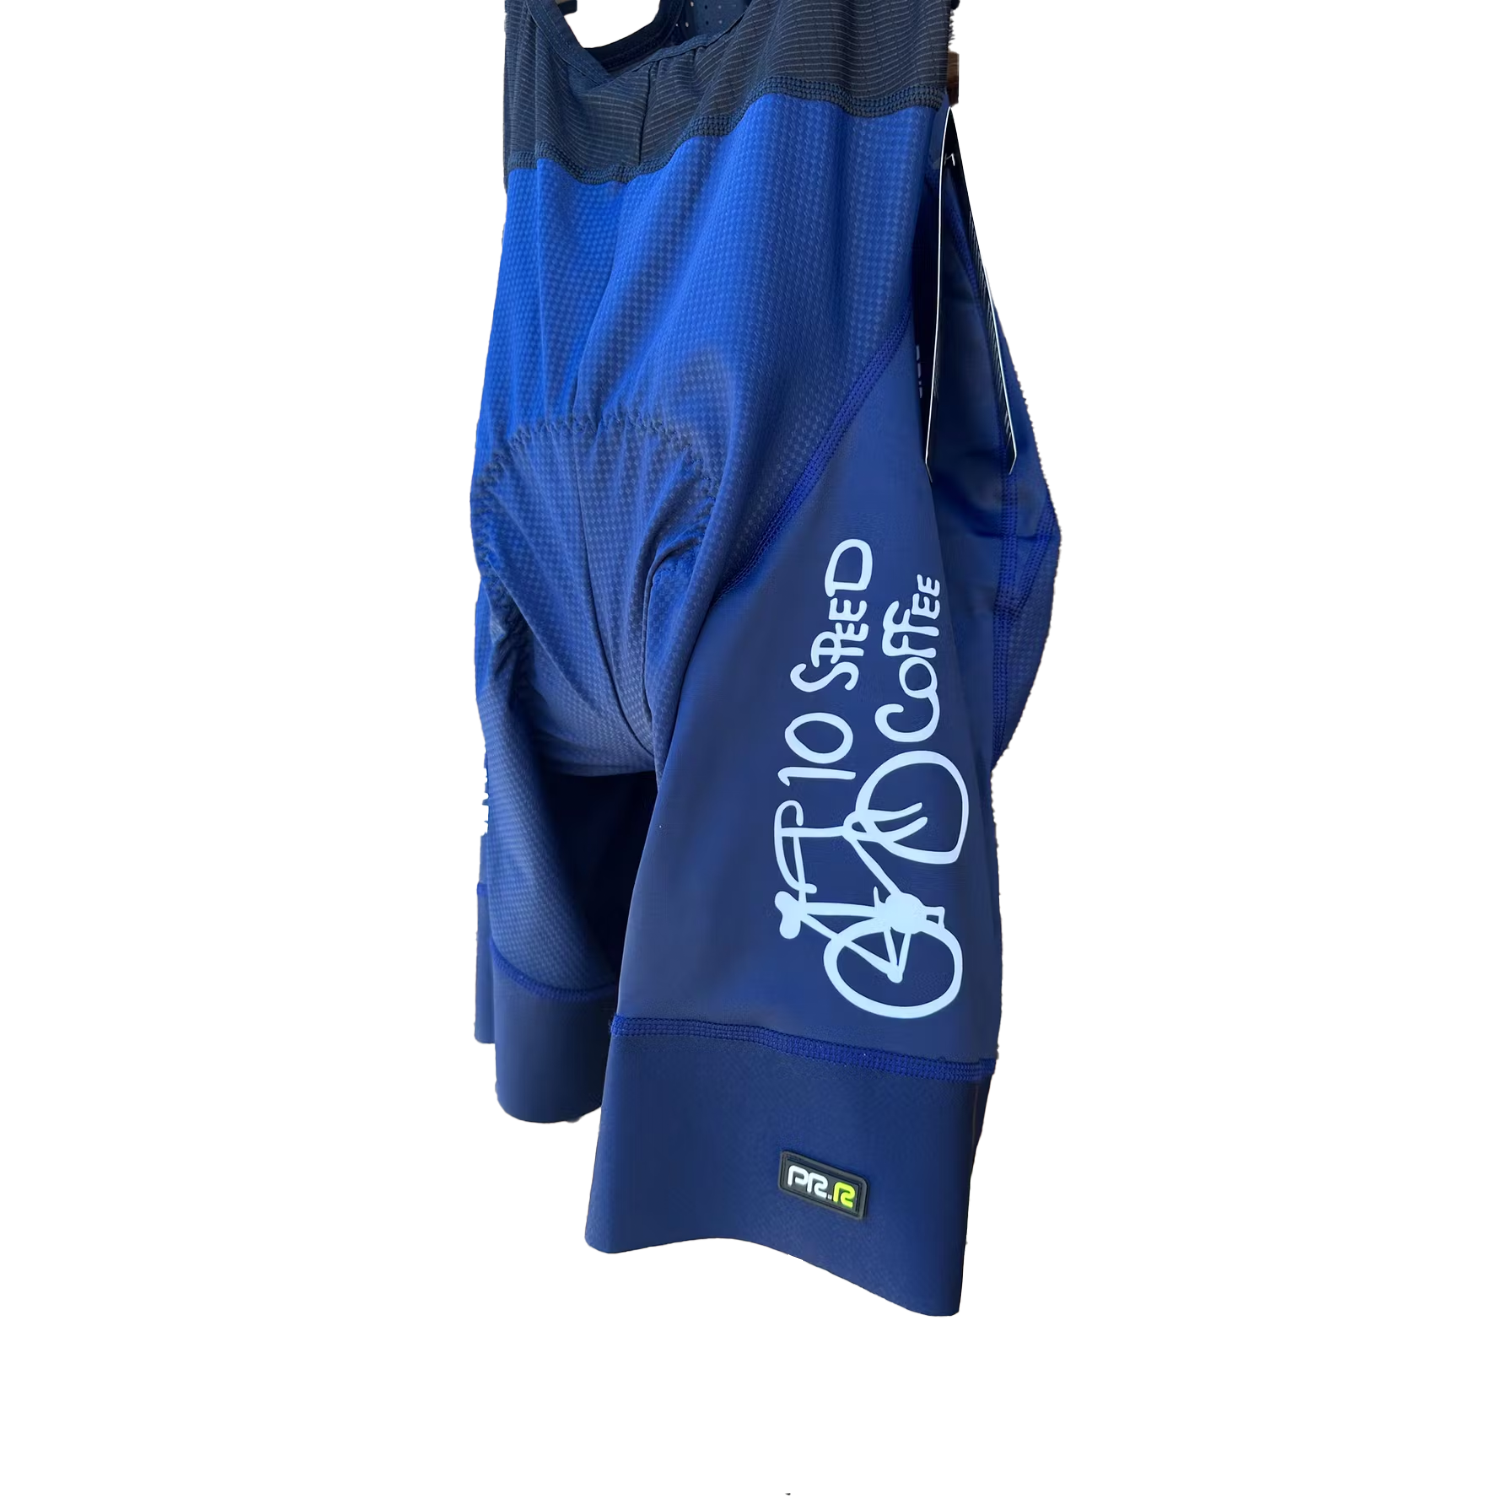 Blue Biker shorts with 10 Speed Coffee logo on side